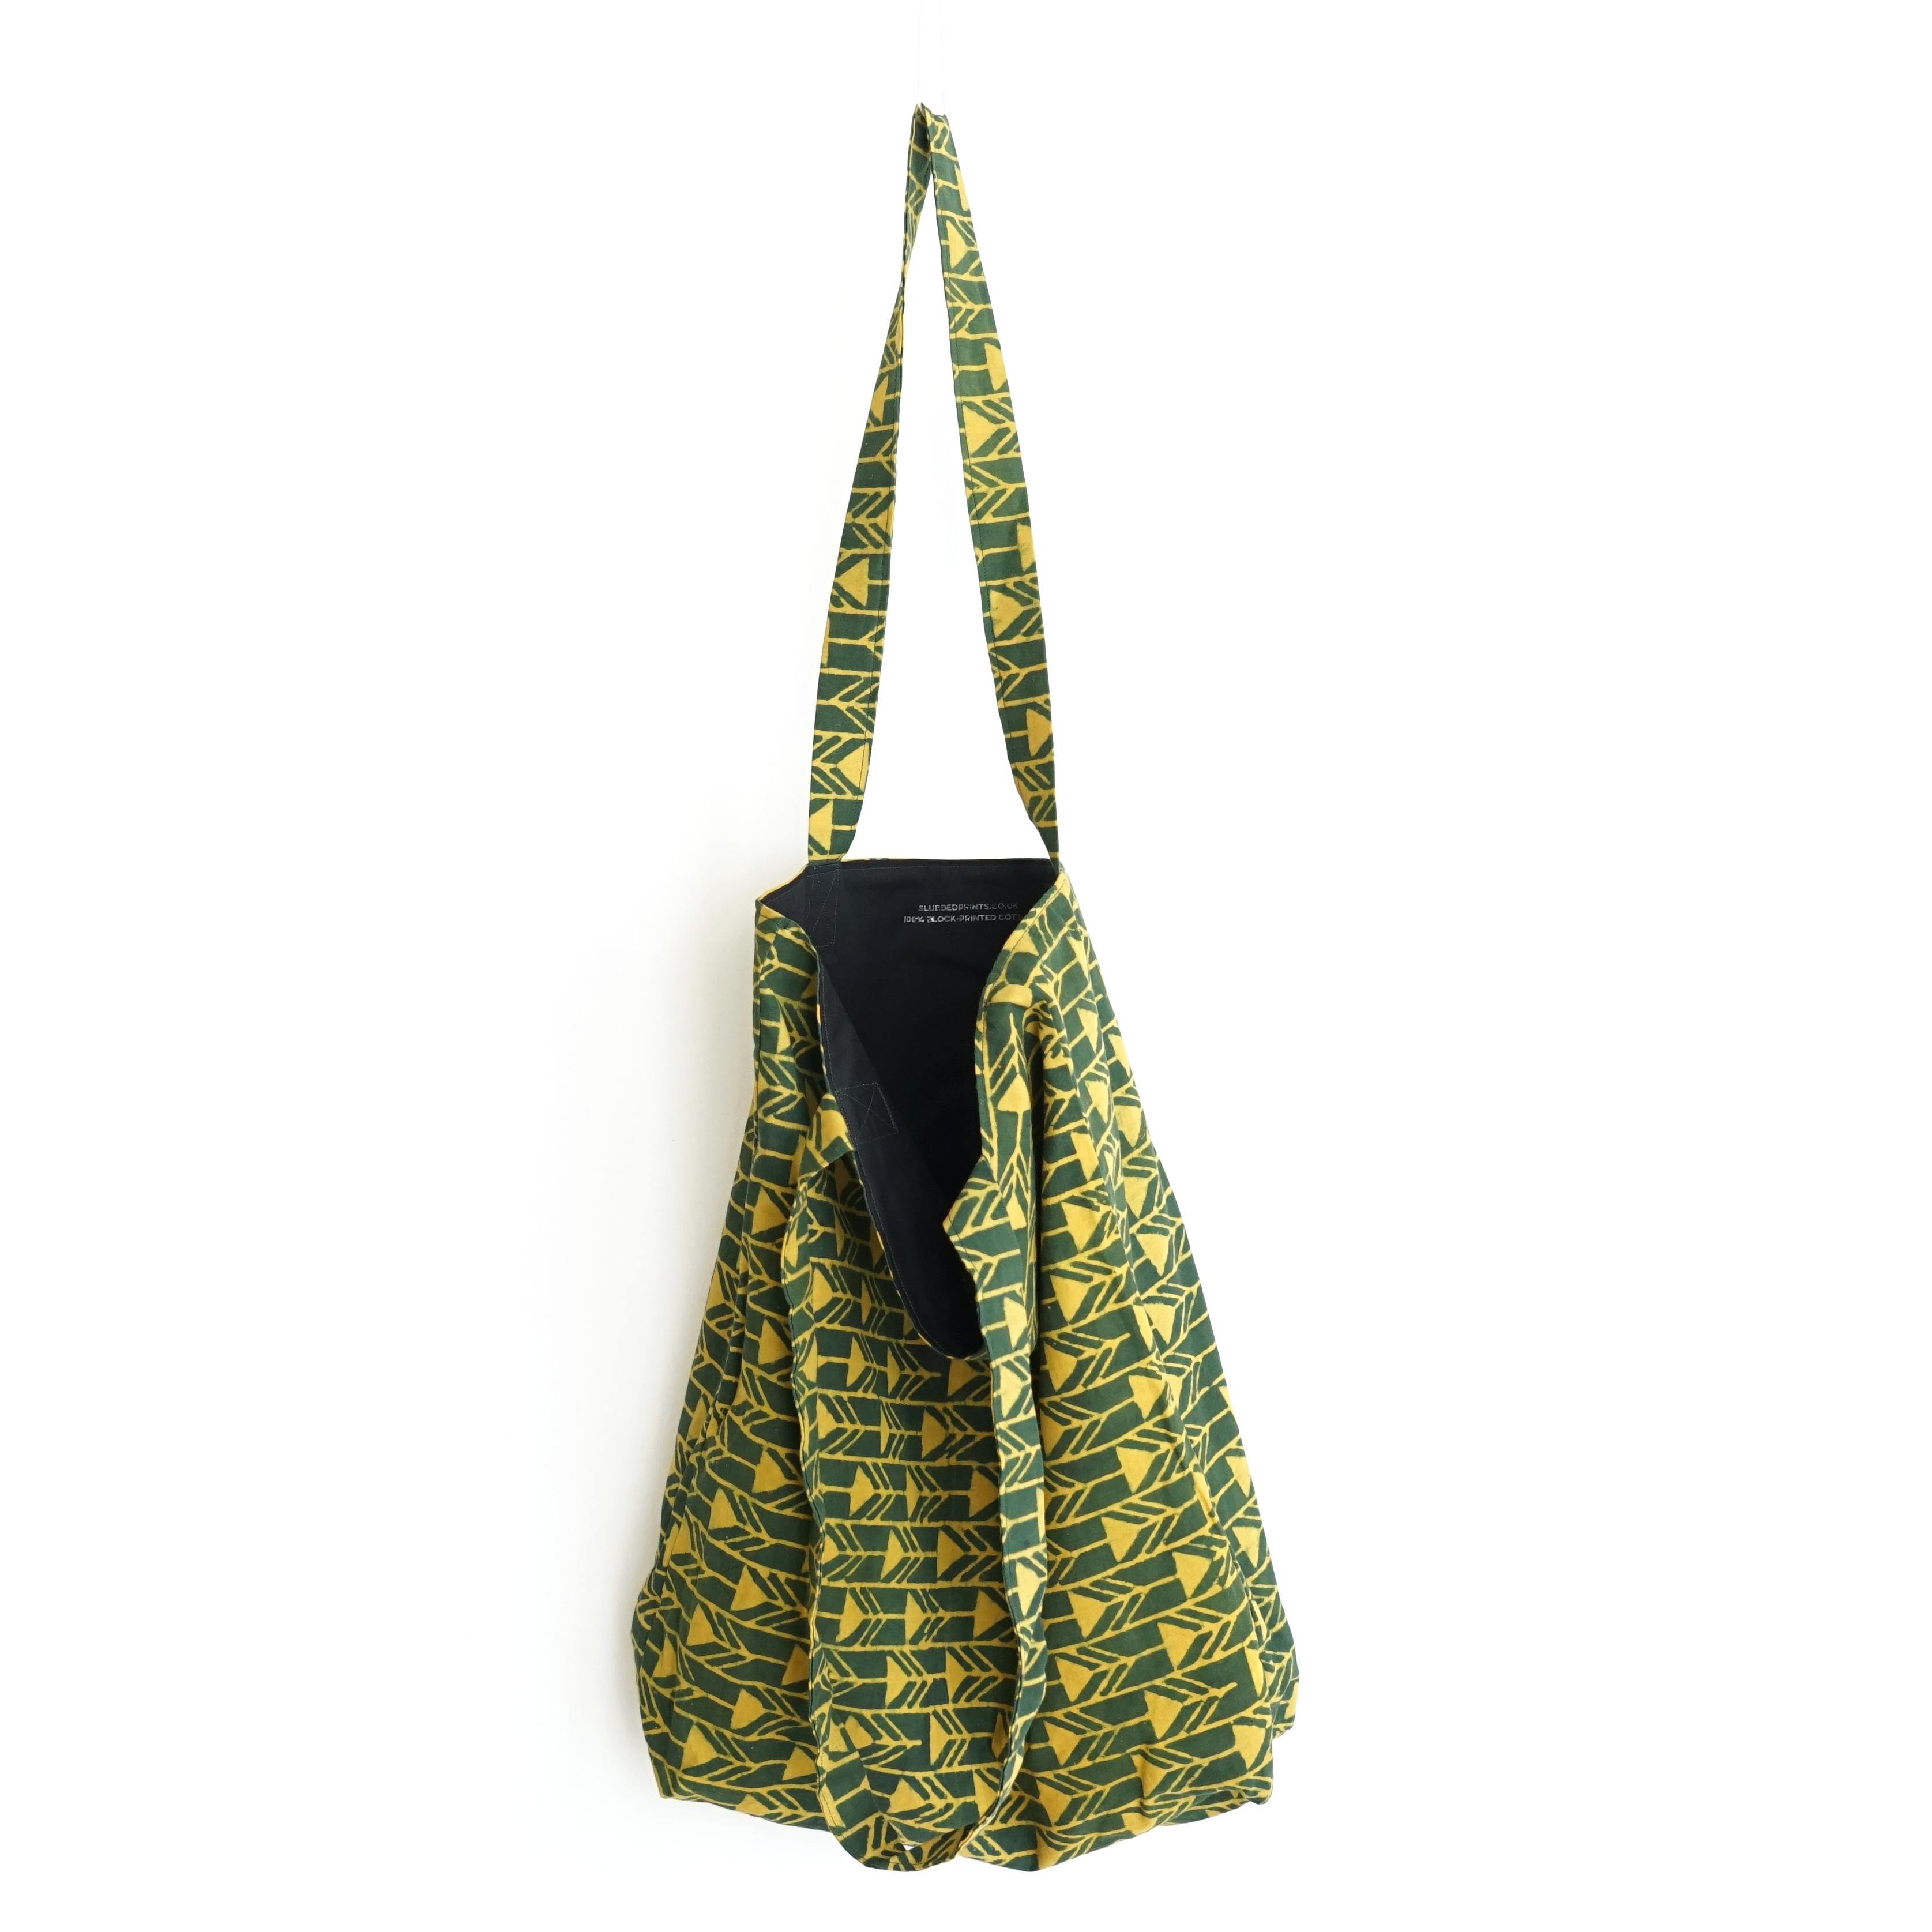 block printed cotton tote bag, green, yellow arrow design, natural dye, lined with black cotton, open